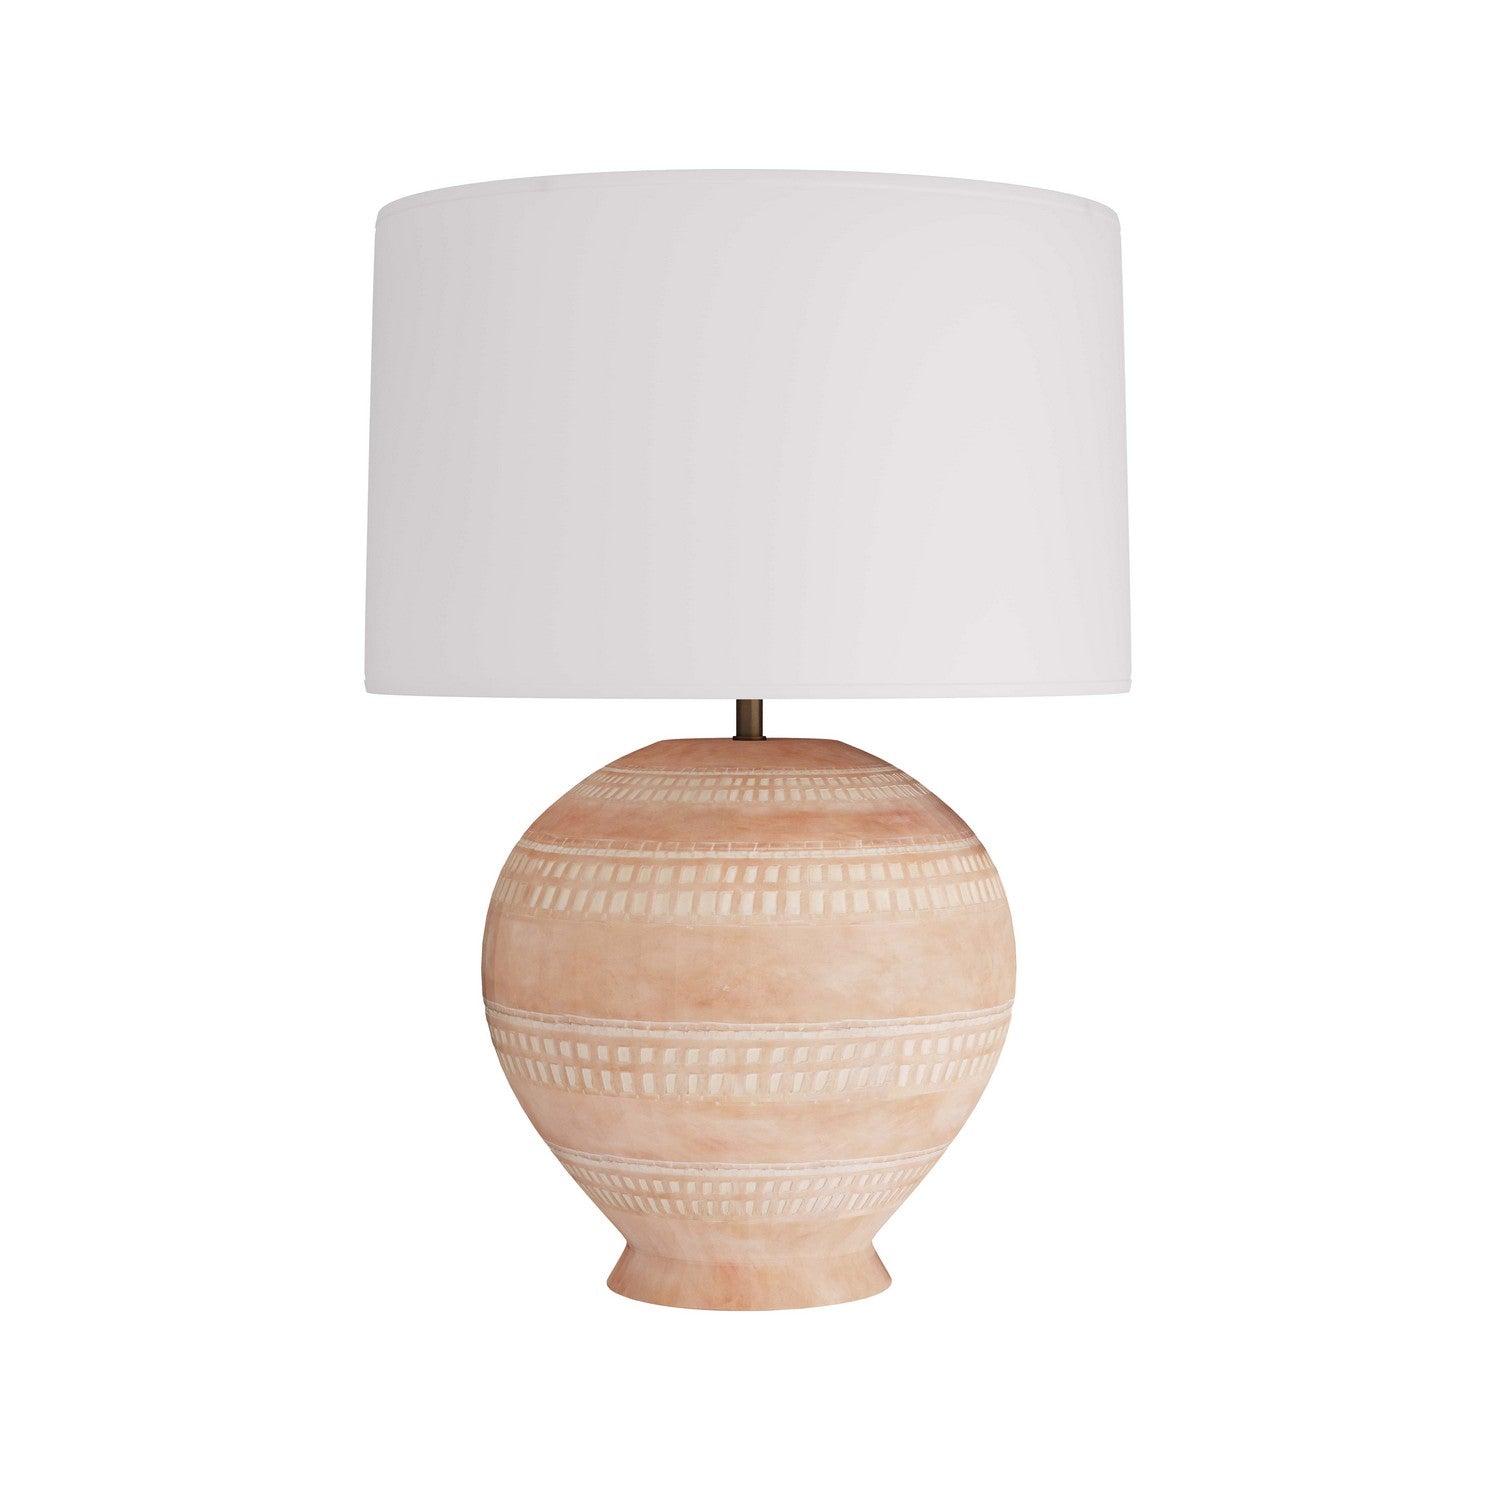 One Light Table Lamp from the Tahoe collection in White Wash Terracotta finish